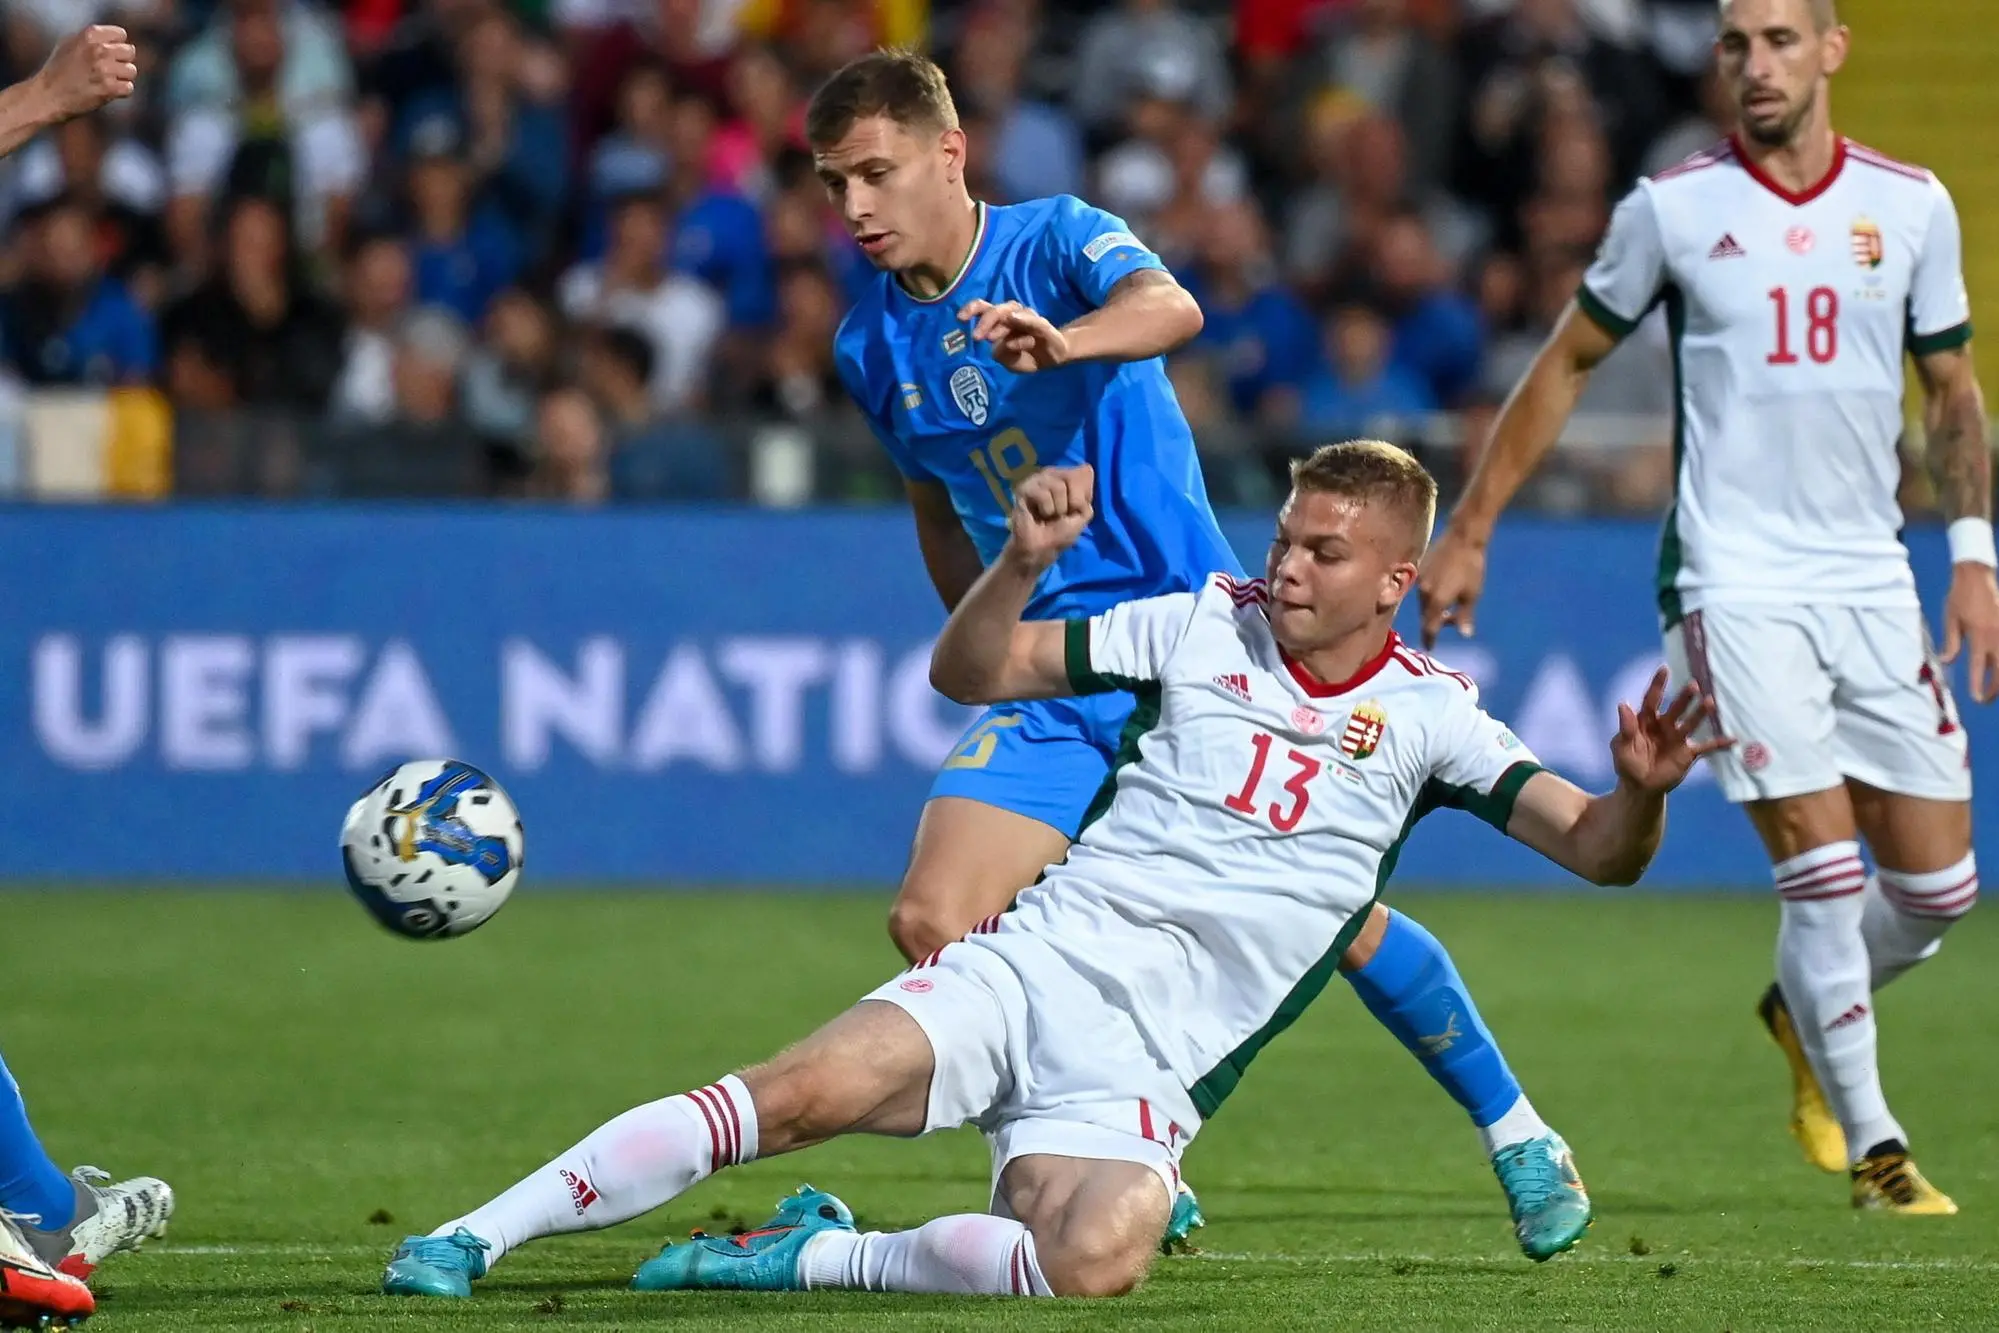 Barella in action against Hungary (Ansa)